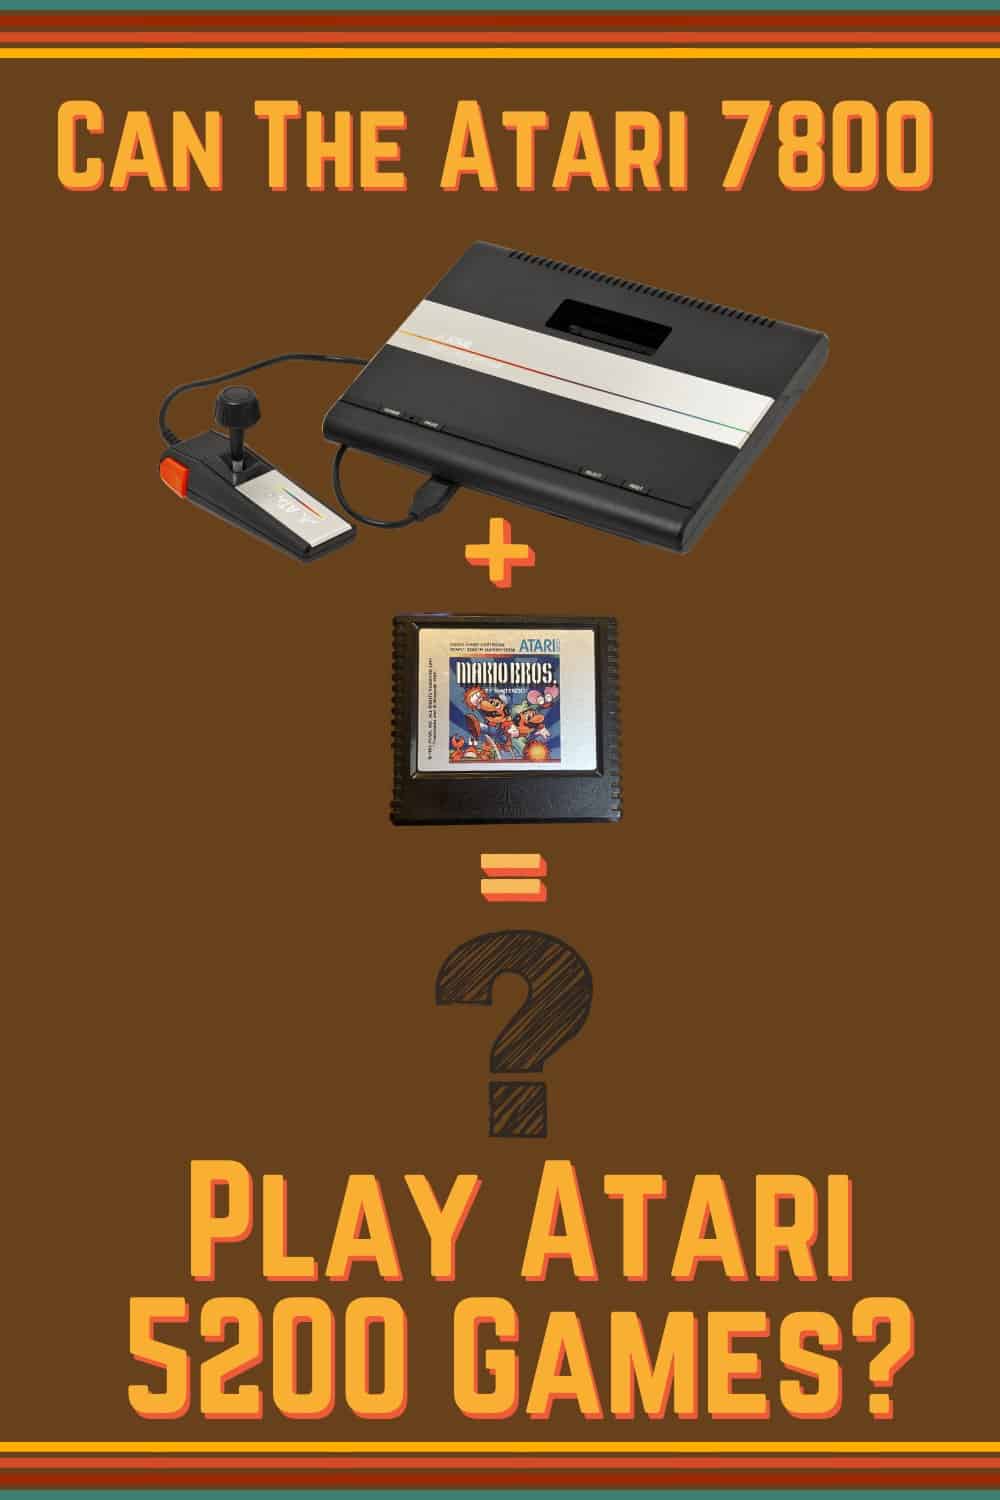 The Atari 7800 is not compatible with the games from the Atari 5200 console